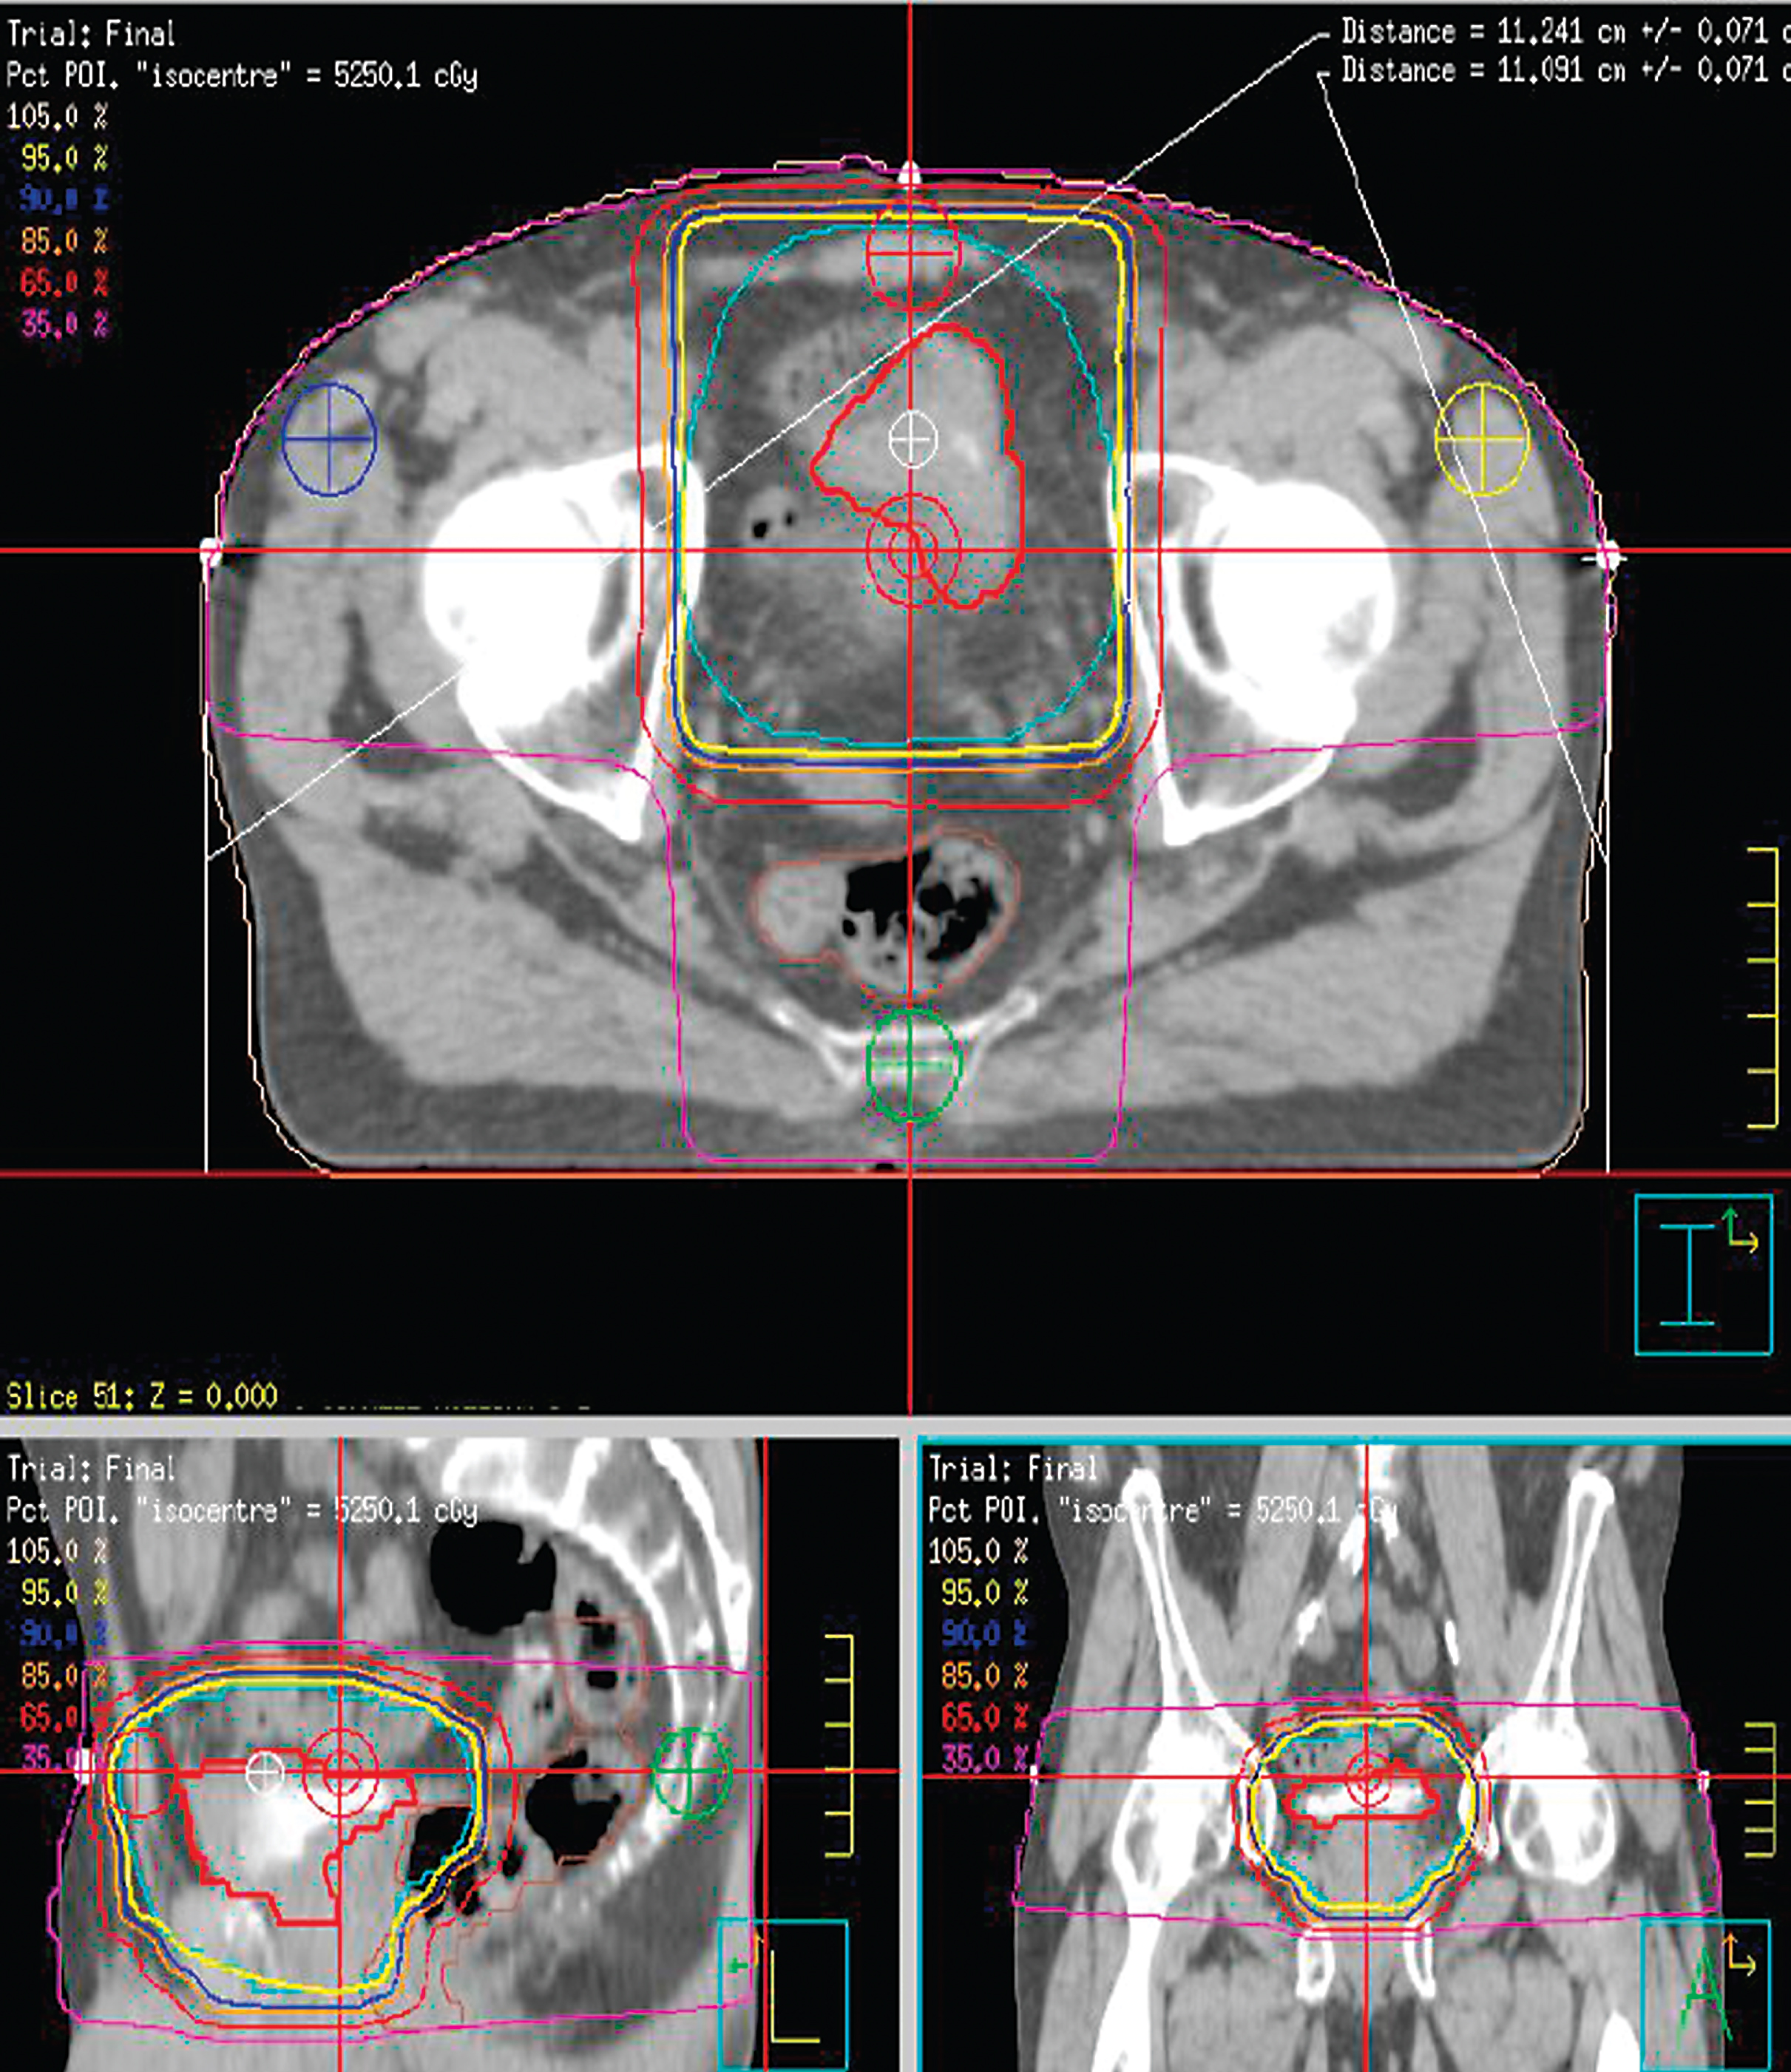 A typical 3 dimensional conformal radiotherapy plan for treating bladder cancer.